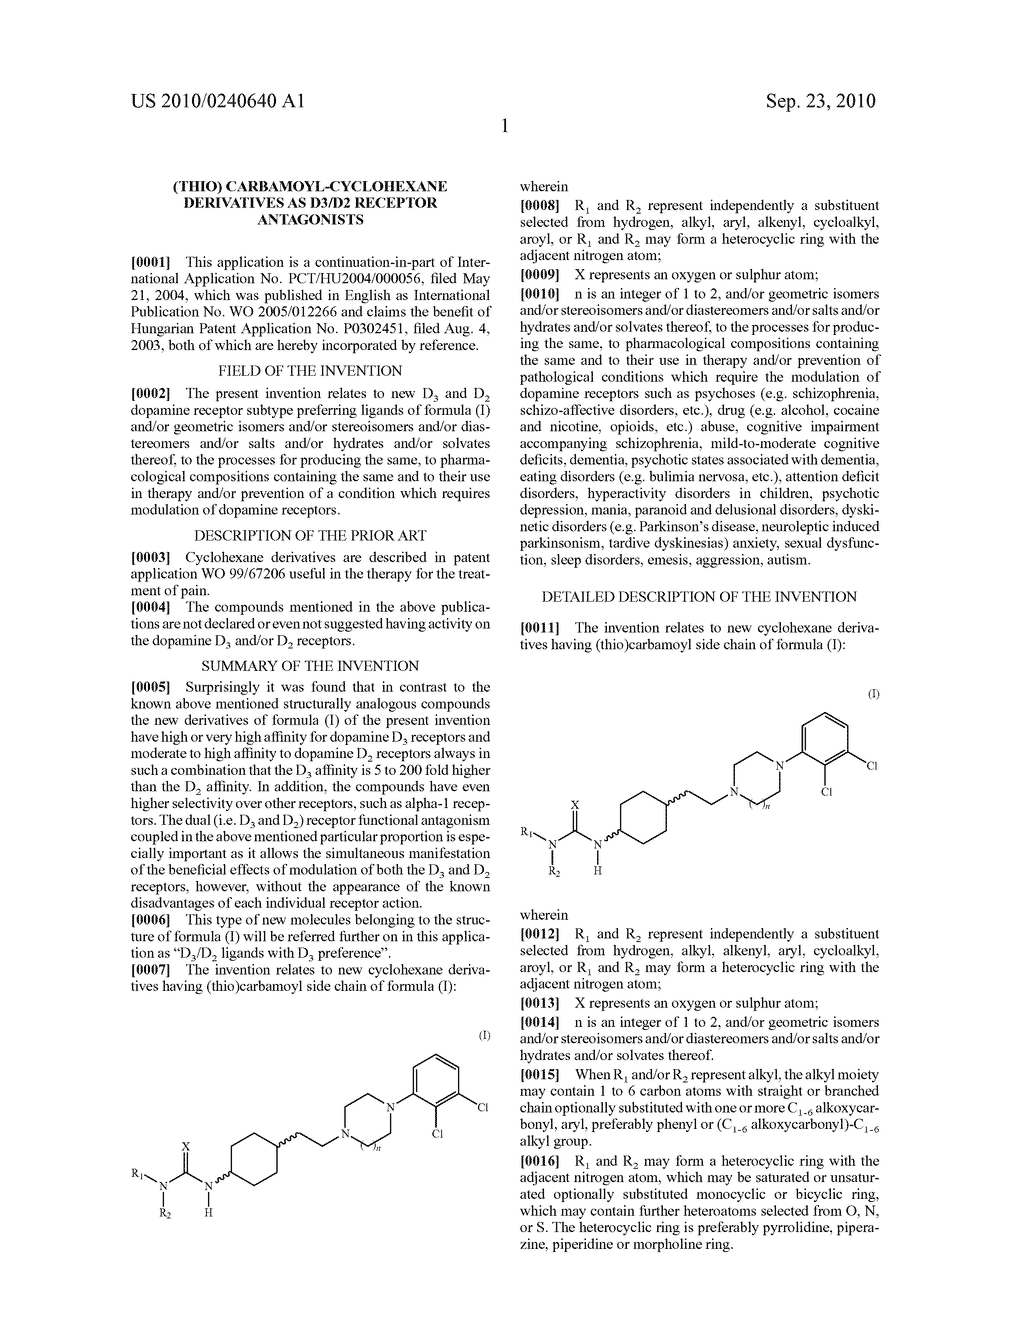 (THIO) Carbamoyl-Cyclohexane Derivatives as D3/D2 Receptor Antagonists - diagram, schematic, and image 02